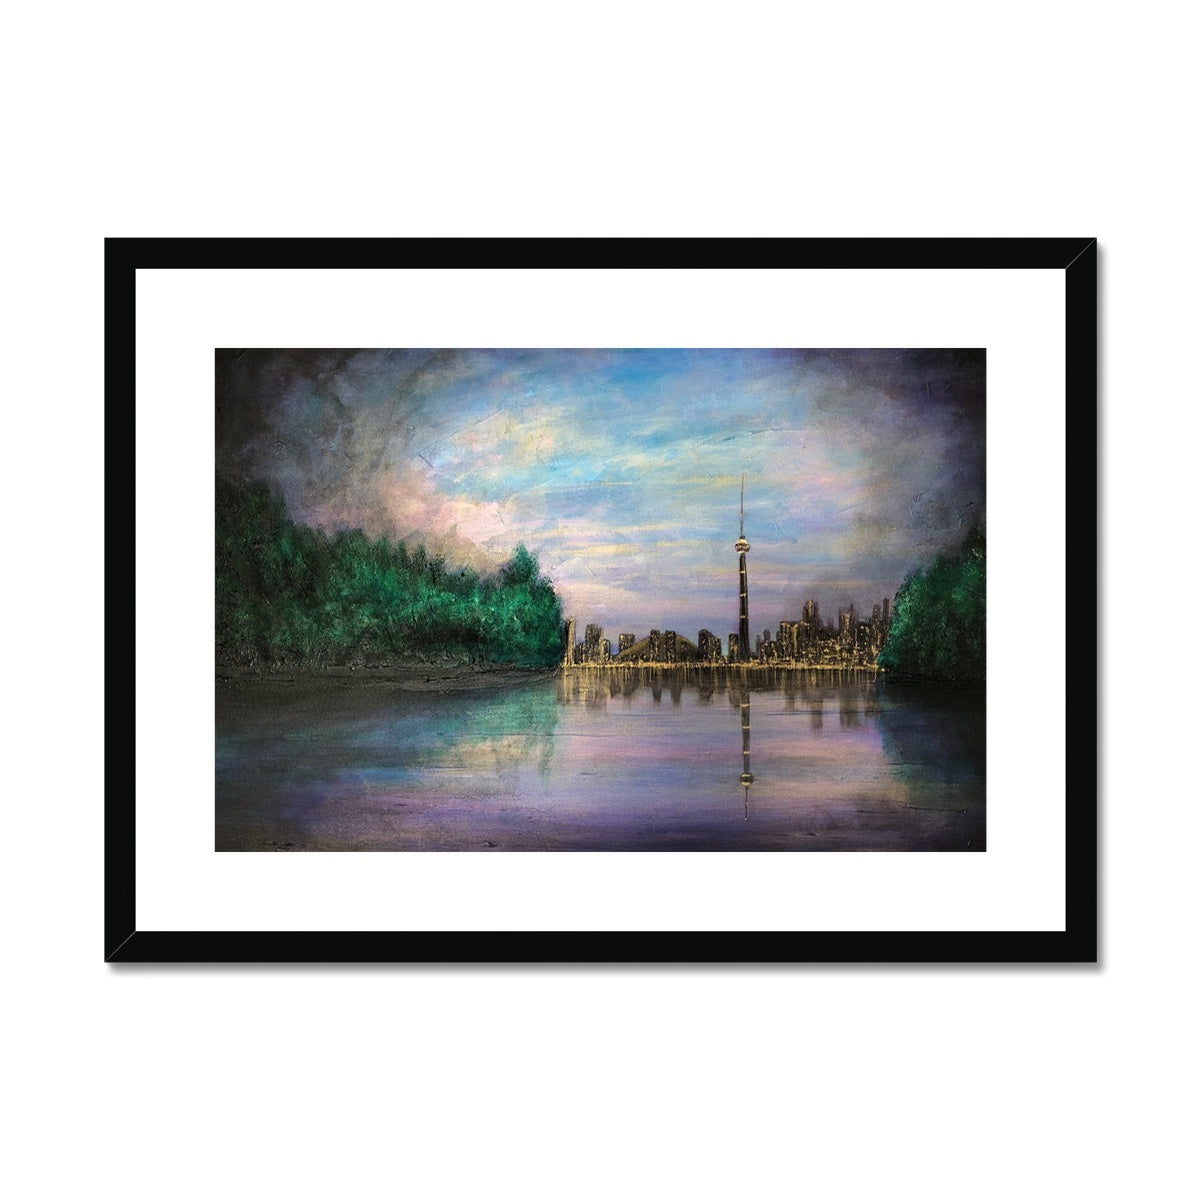 Toronto Last Light Painting | Framed & Mounted Prints From Scotland-Framed & Mounted Prints-World Art Gallery-A2 Landscape-Black Frame-Paintings, Prints, Homeware, Art Gifts From Scotland By Scottish Artist Kevin Hunter